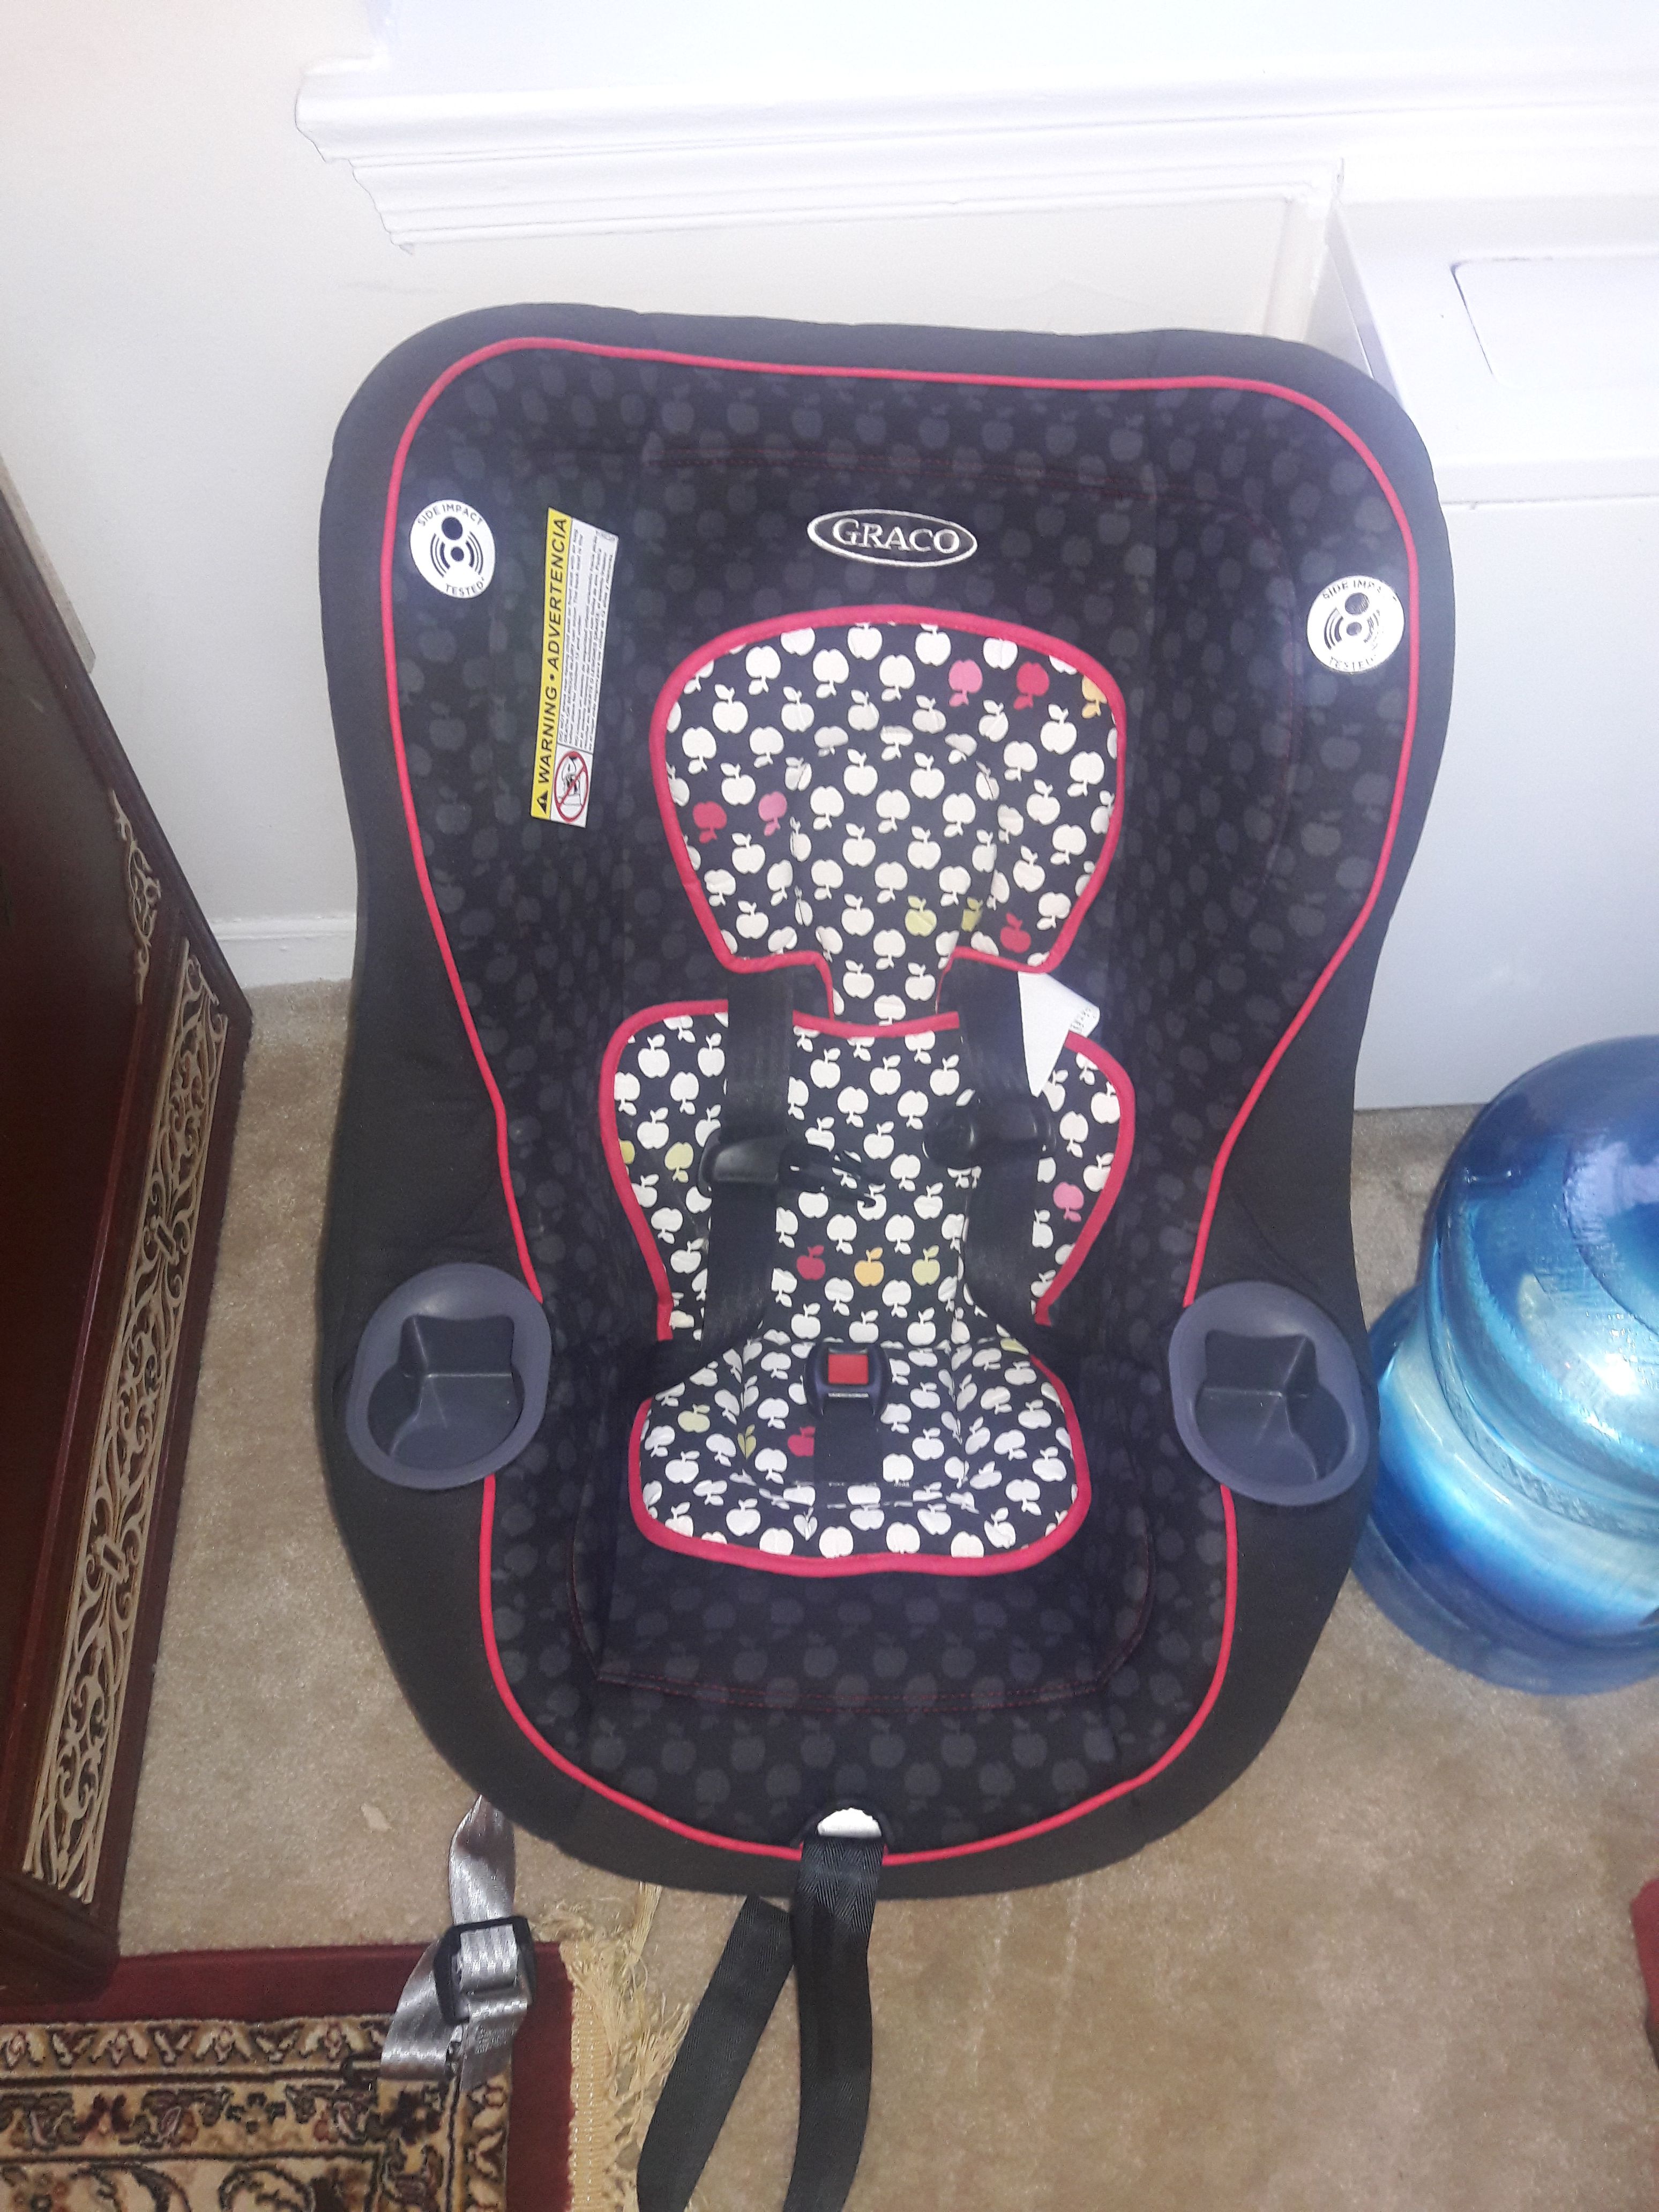 New car seat but open box